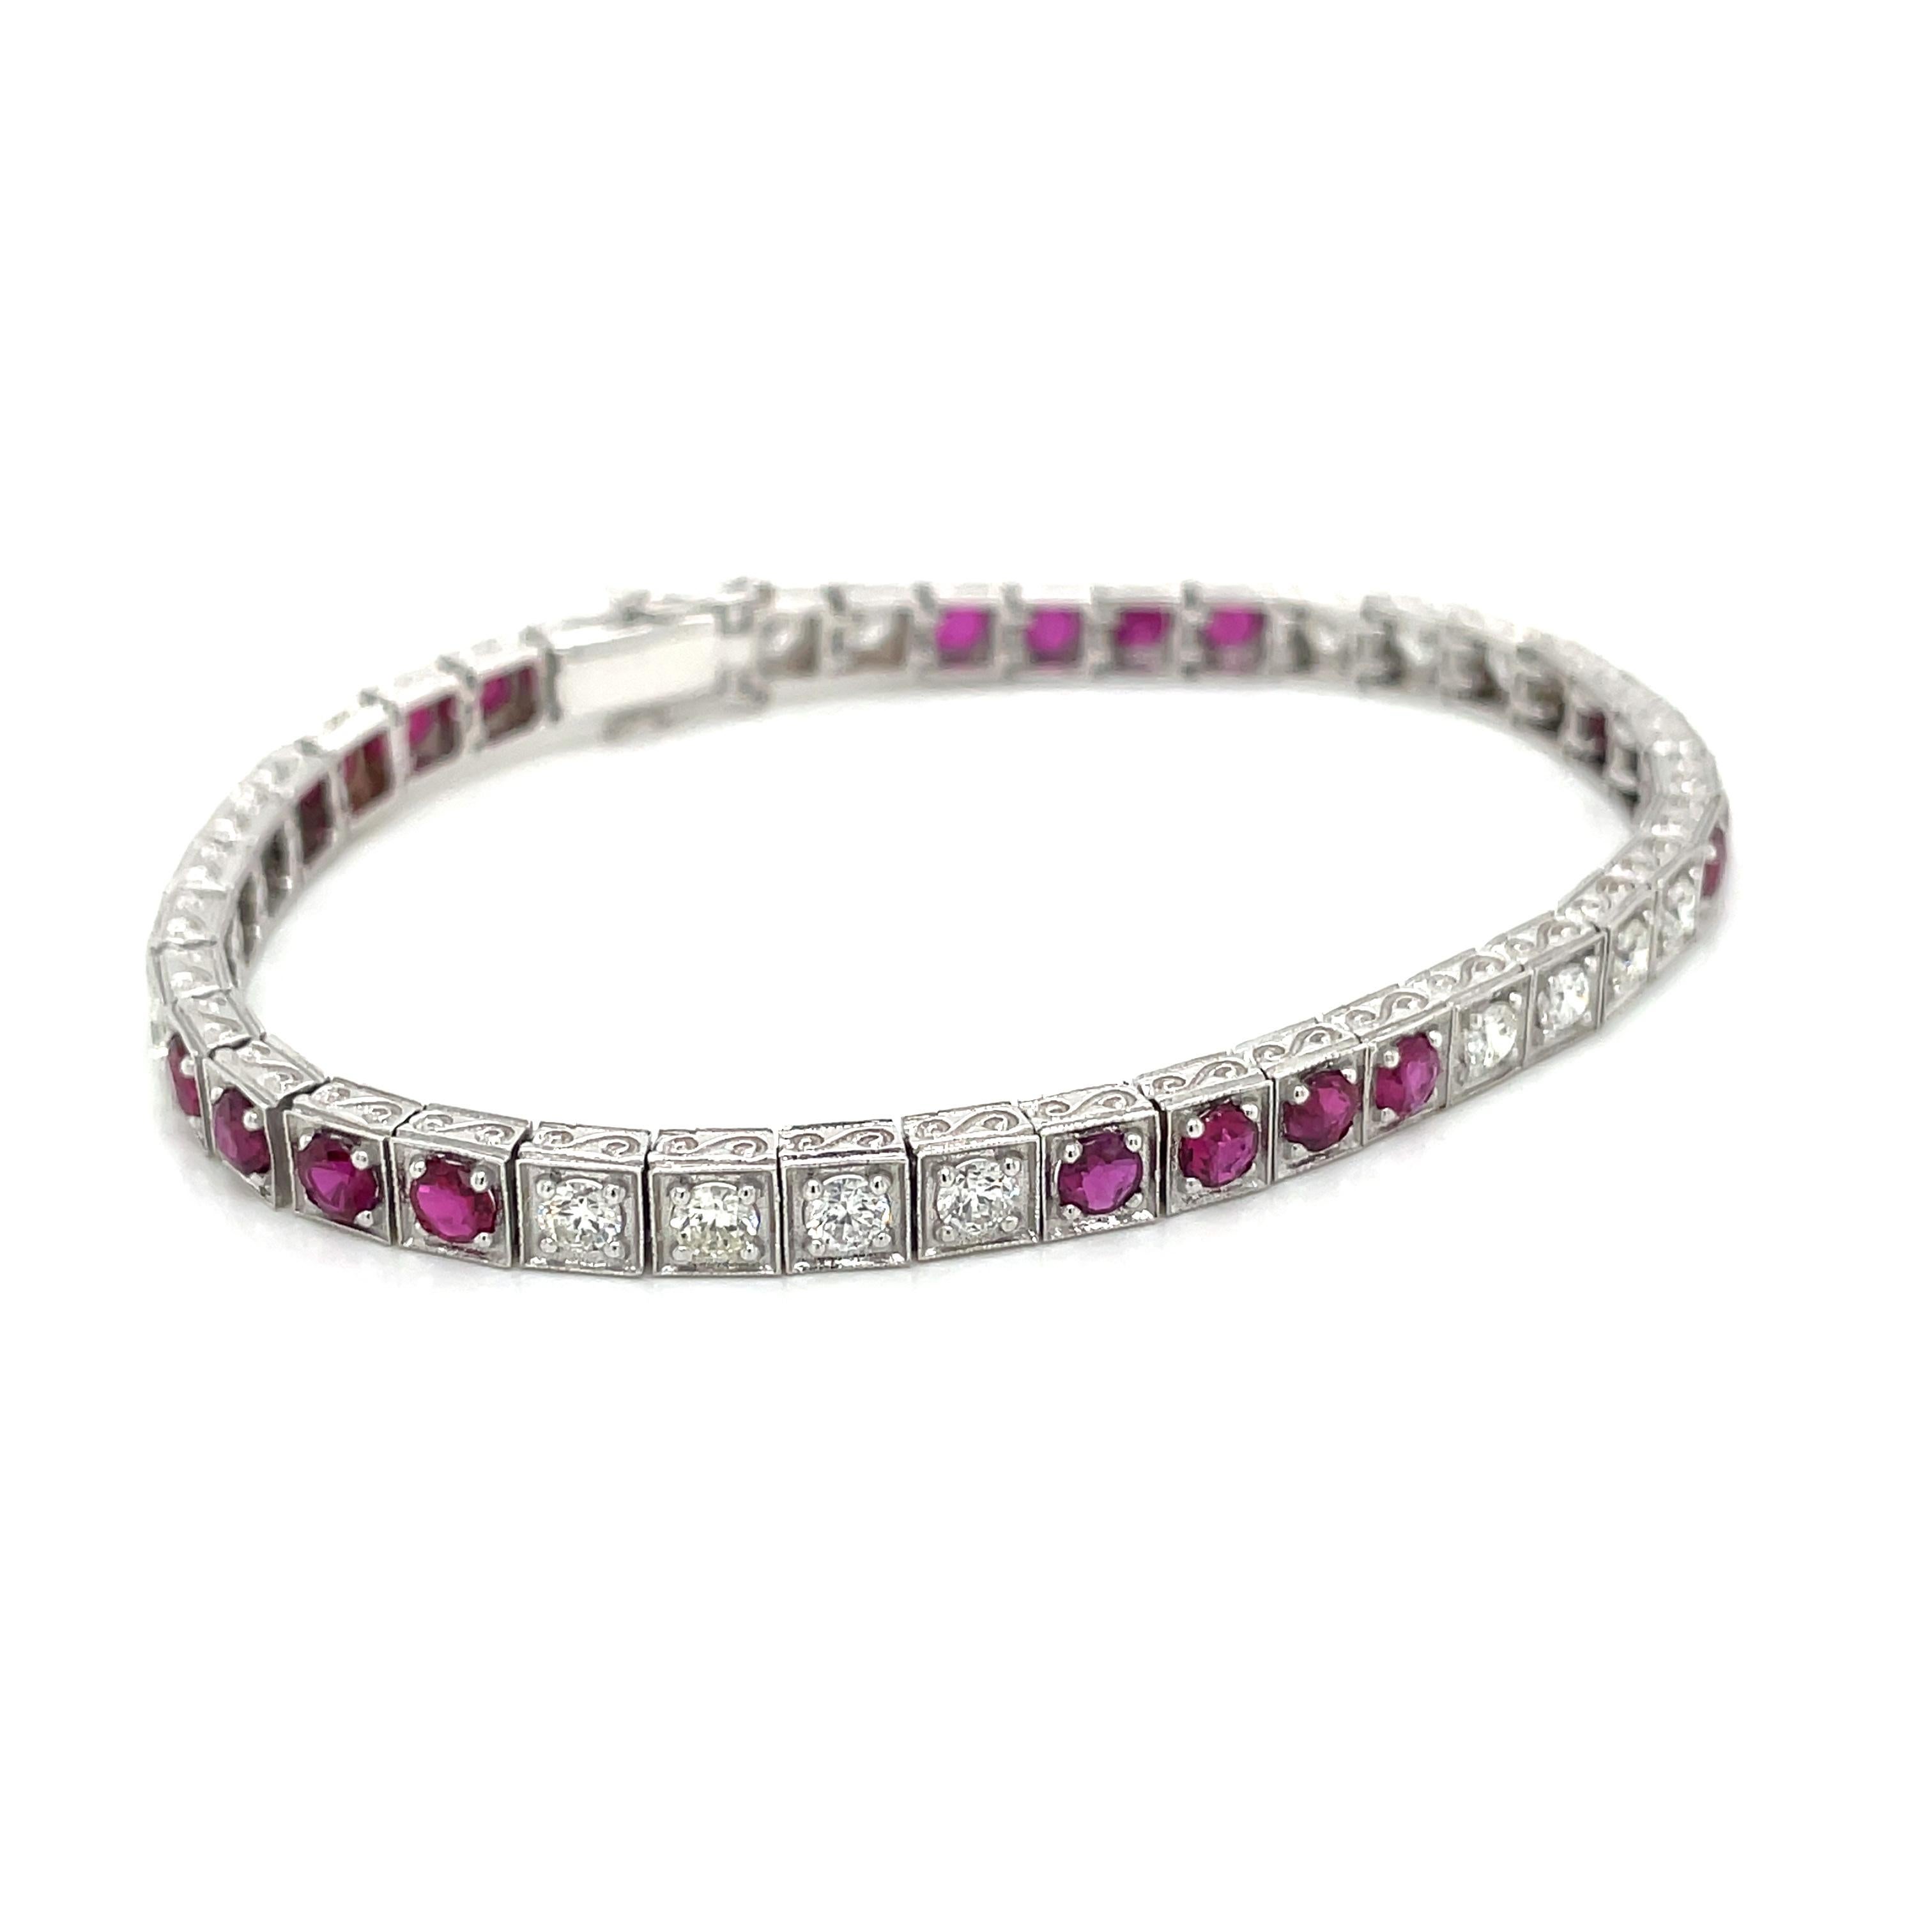 Unusual bracelet original from 1980', designed and crafted entirely by hand in the traditional way, using age old techniques and processes, this make it very soft and comfortable to wear.
Mounted in 18k white gold, and set with total 2.00 carat of